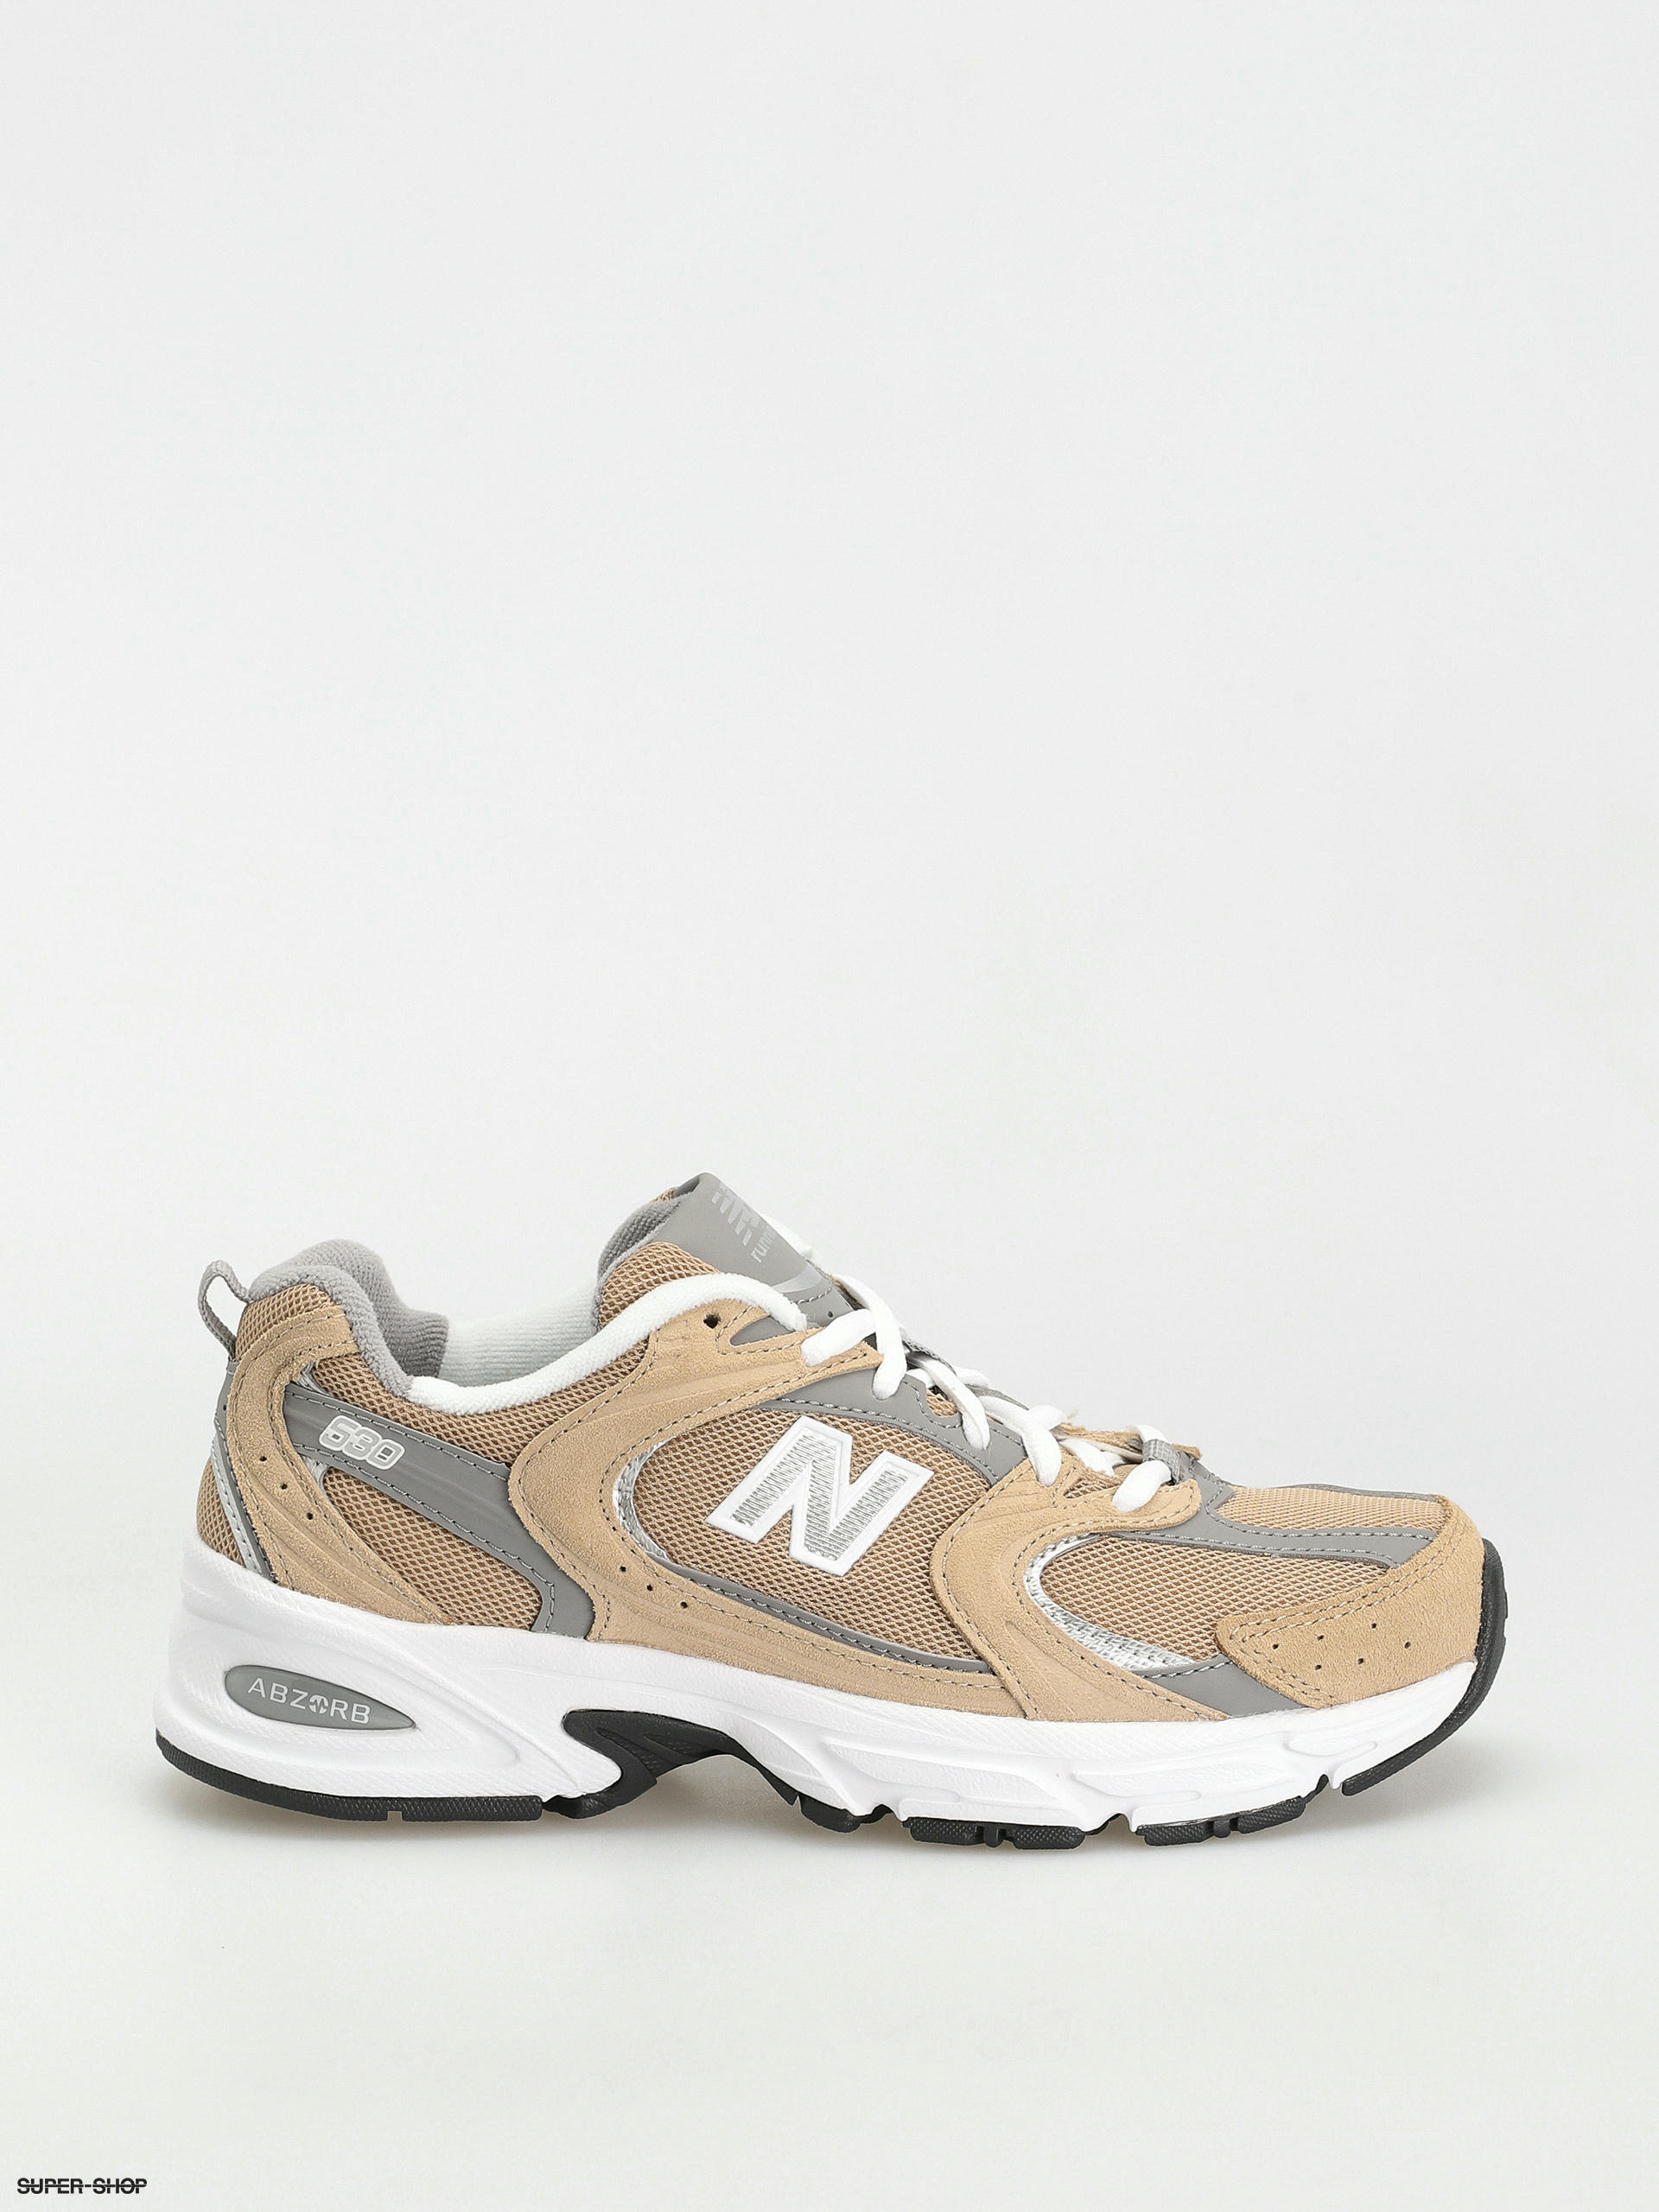 New Balance 530 Shoes (rich earth)